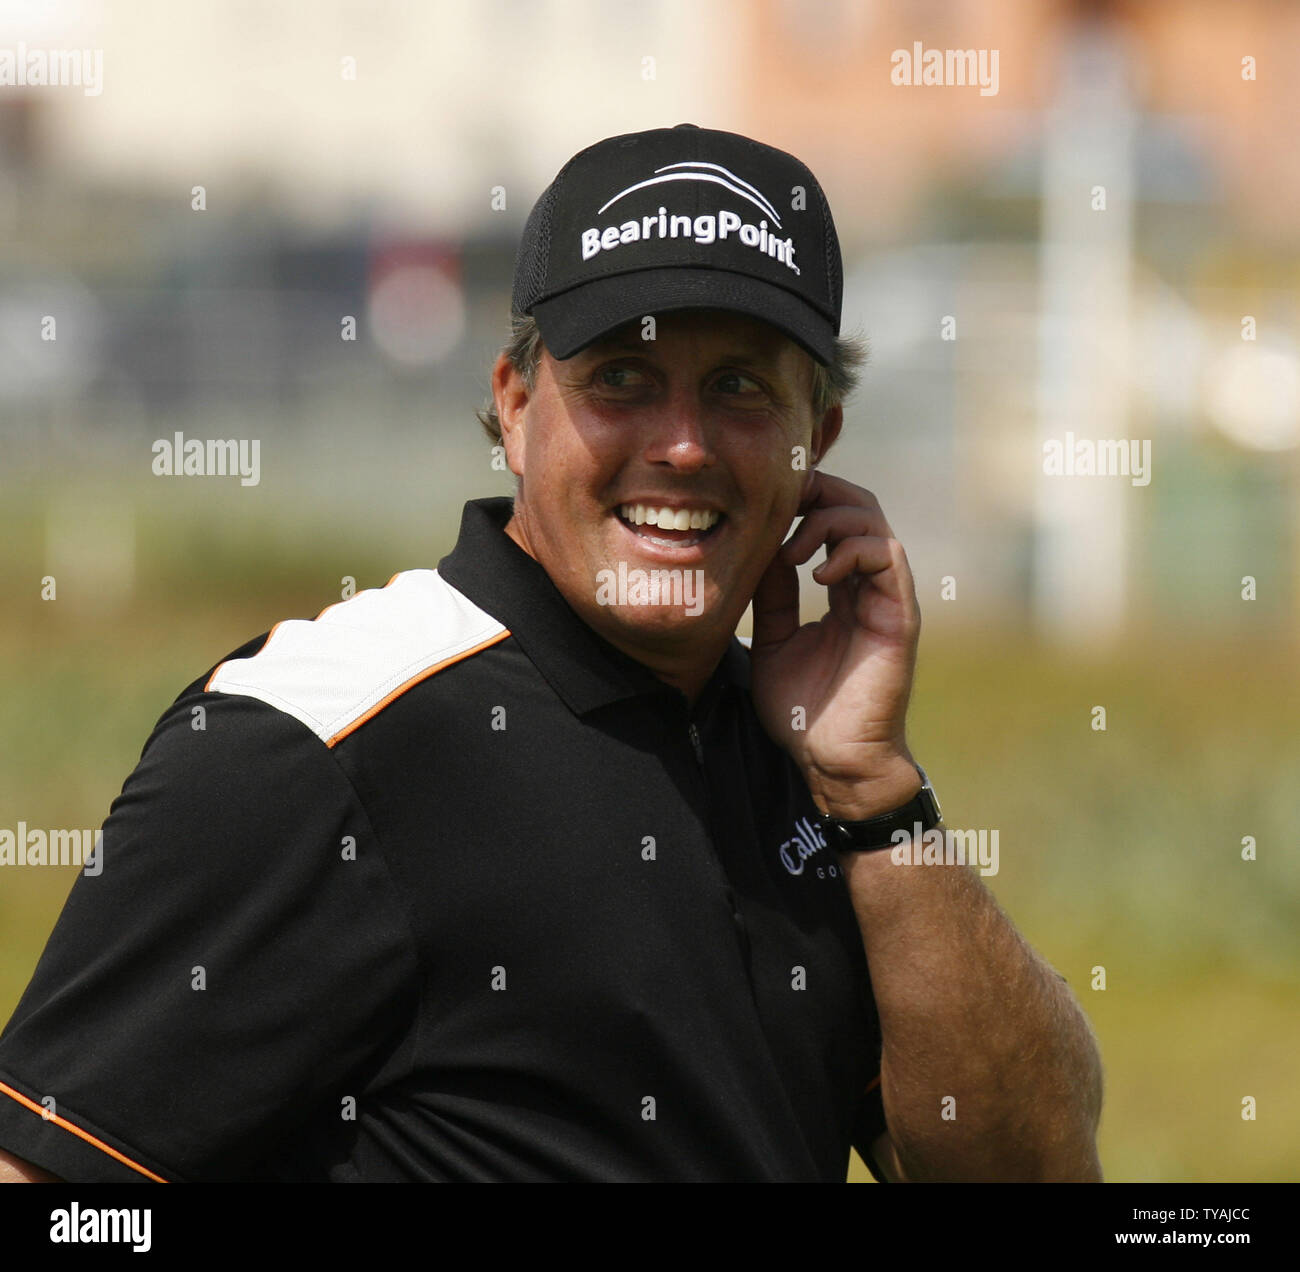 American Phil Mickelson smiles during the second day of practice at the 136th Open Championship at Carnoustie, Scotland on July 17, 2007.   (UPI Photo/Hugo Philpott) Stock Photo